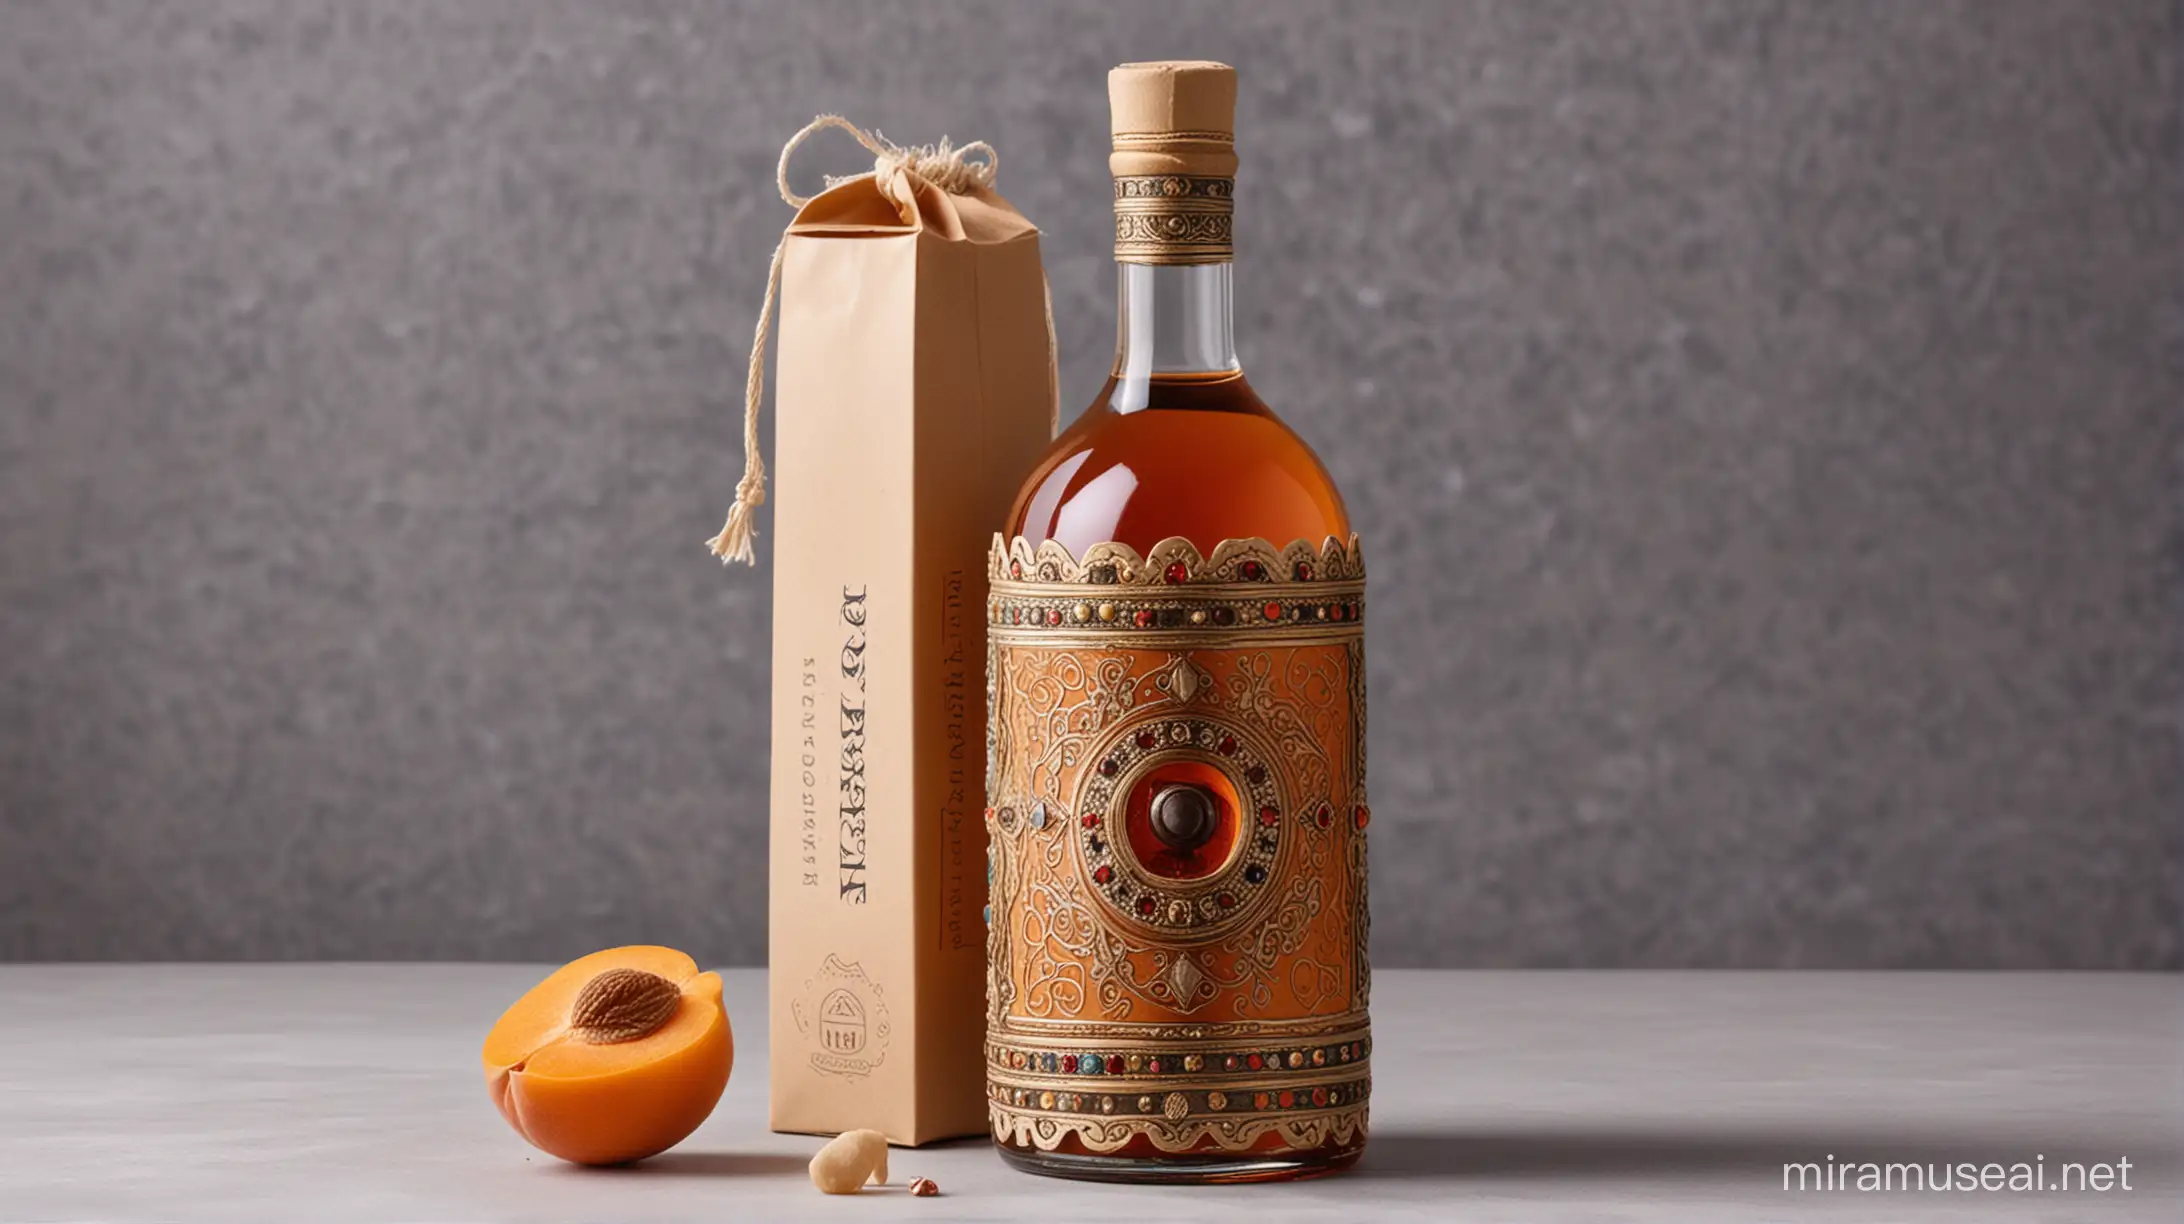 Luxurious Modern Armenian Apricot Wine KARS Bottle with Ornamented Packaging